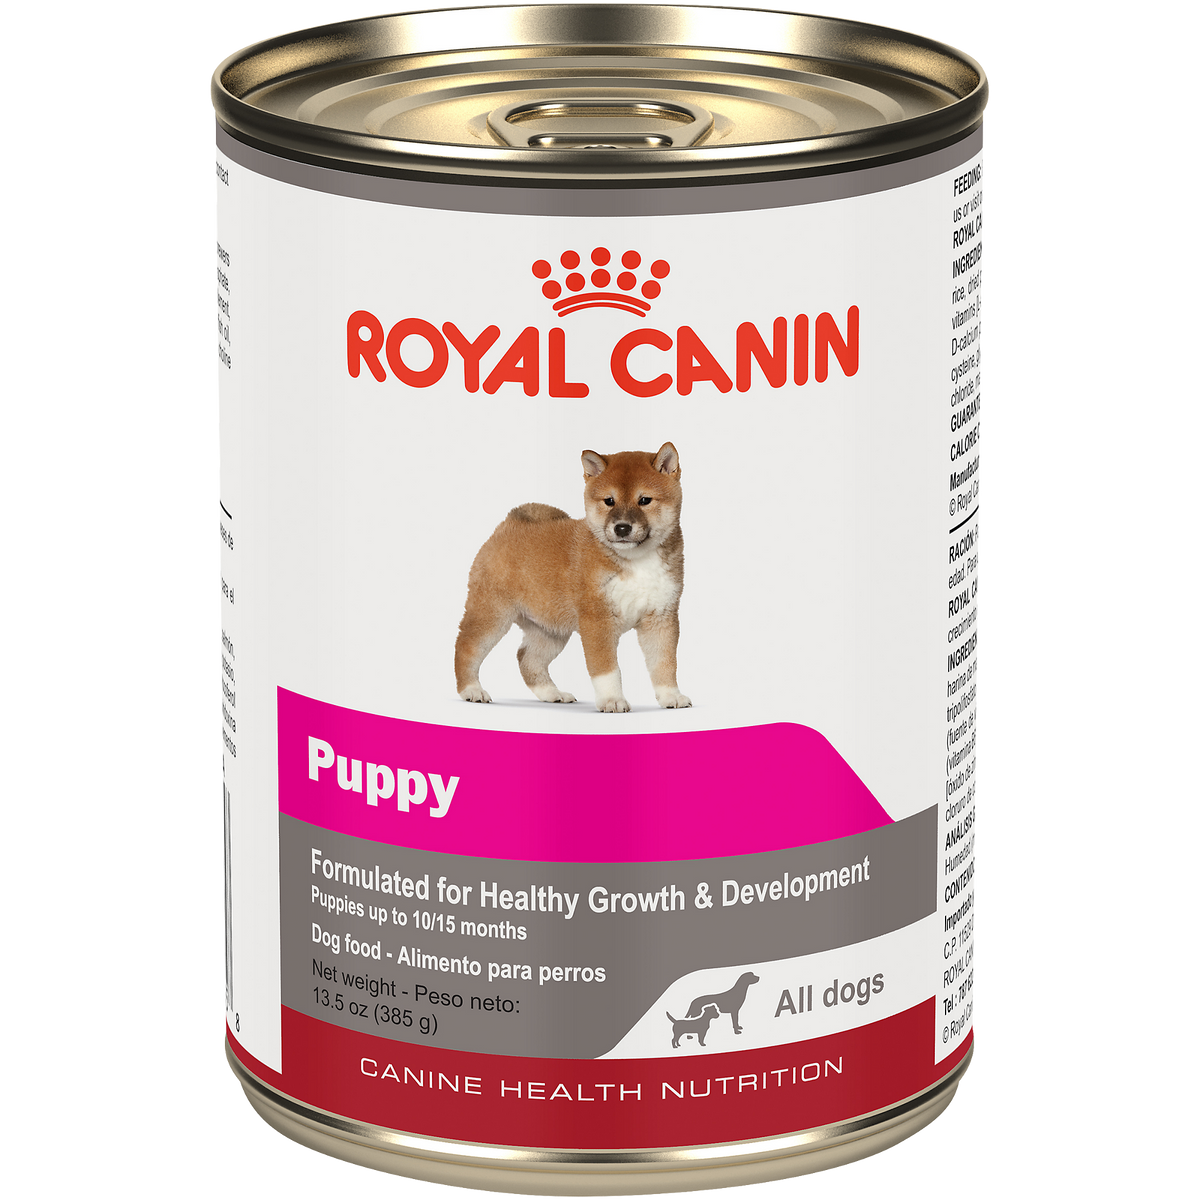 Royal Canin® Canine Health Nutrition™ Puppy Canned Dog Food, 13.5 oz